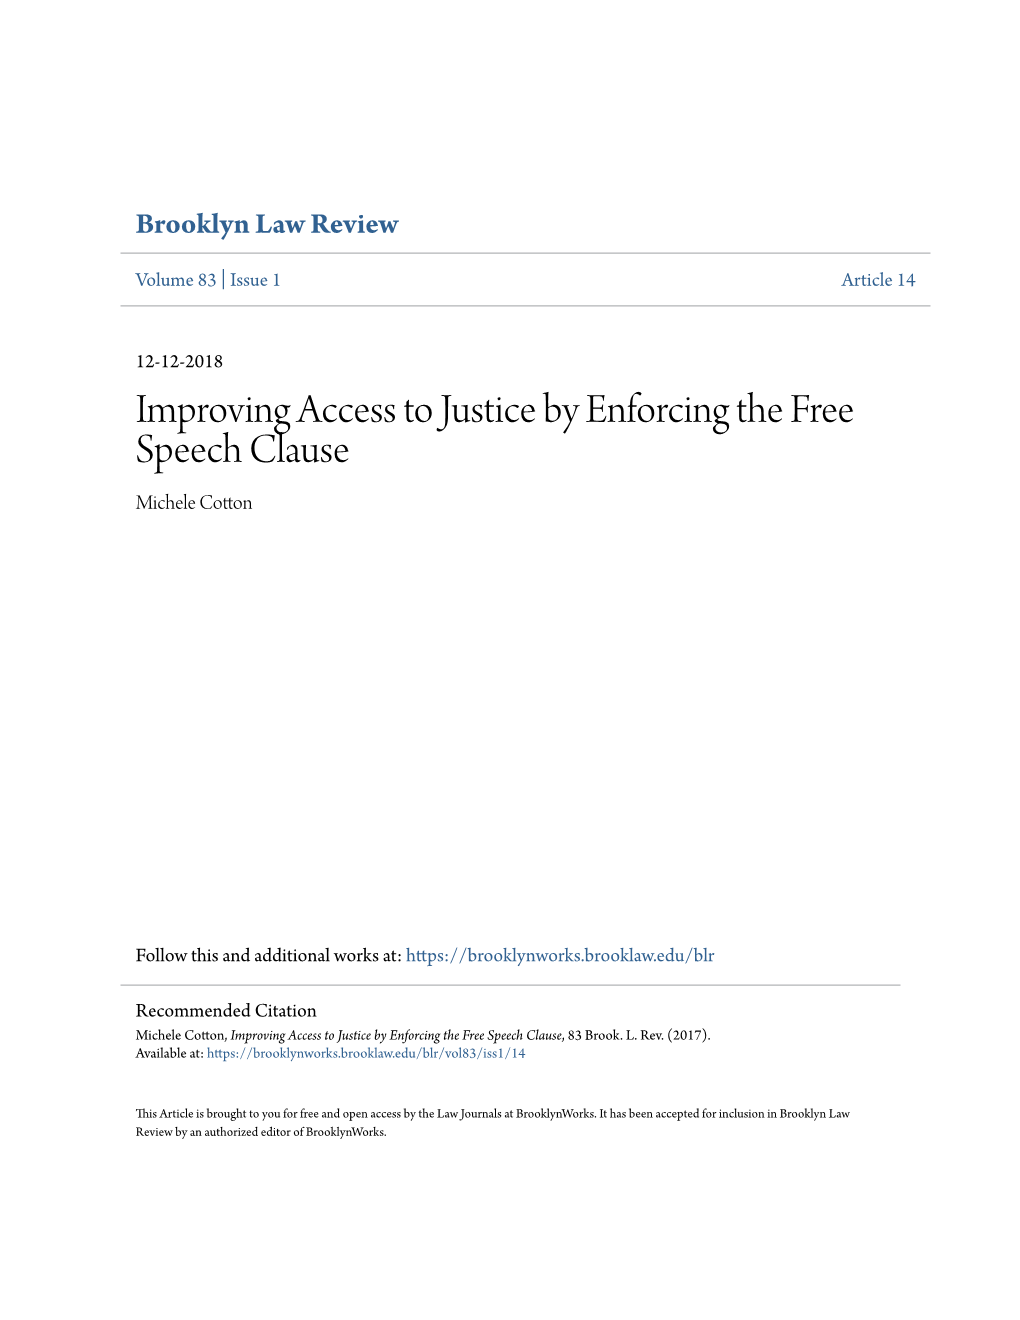 Improving Access to Justice by Enforcing the Free Speech Clause Michele Cotton